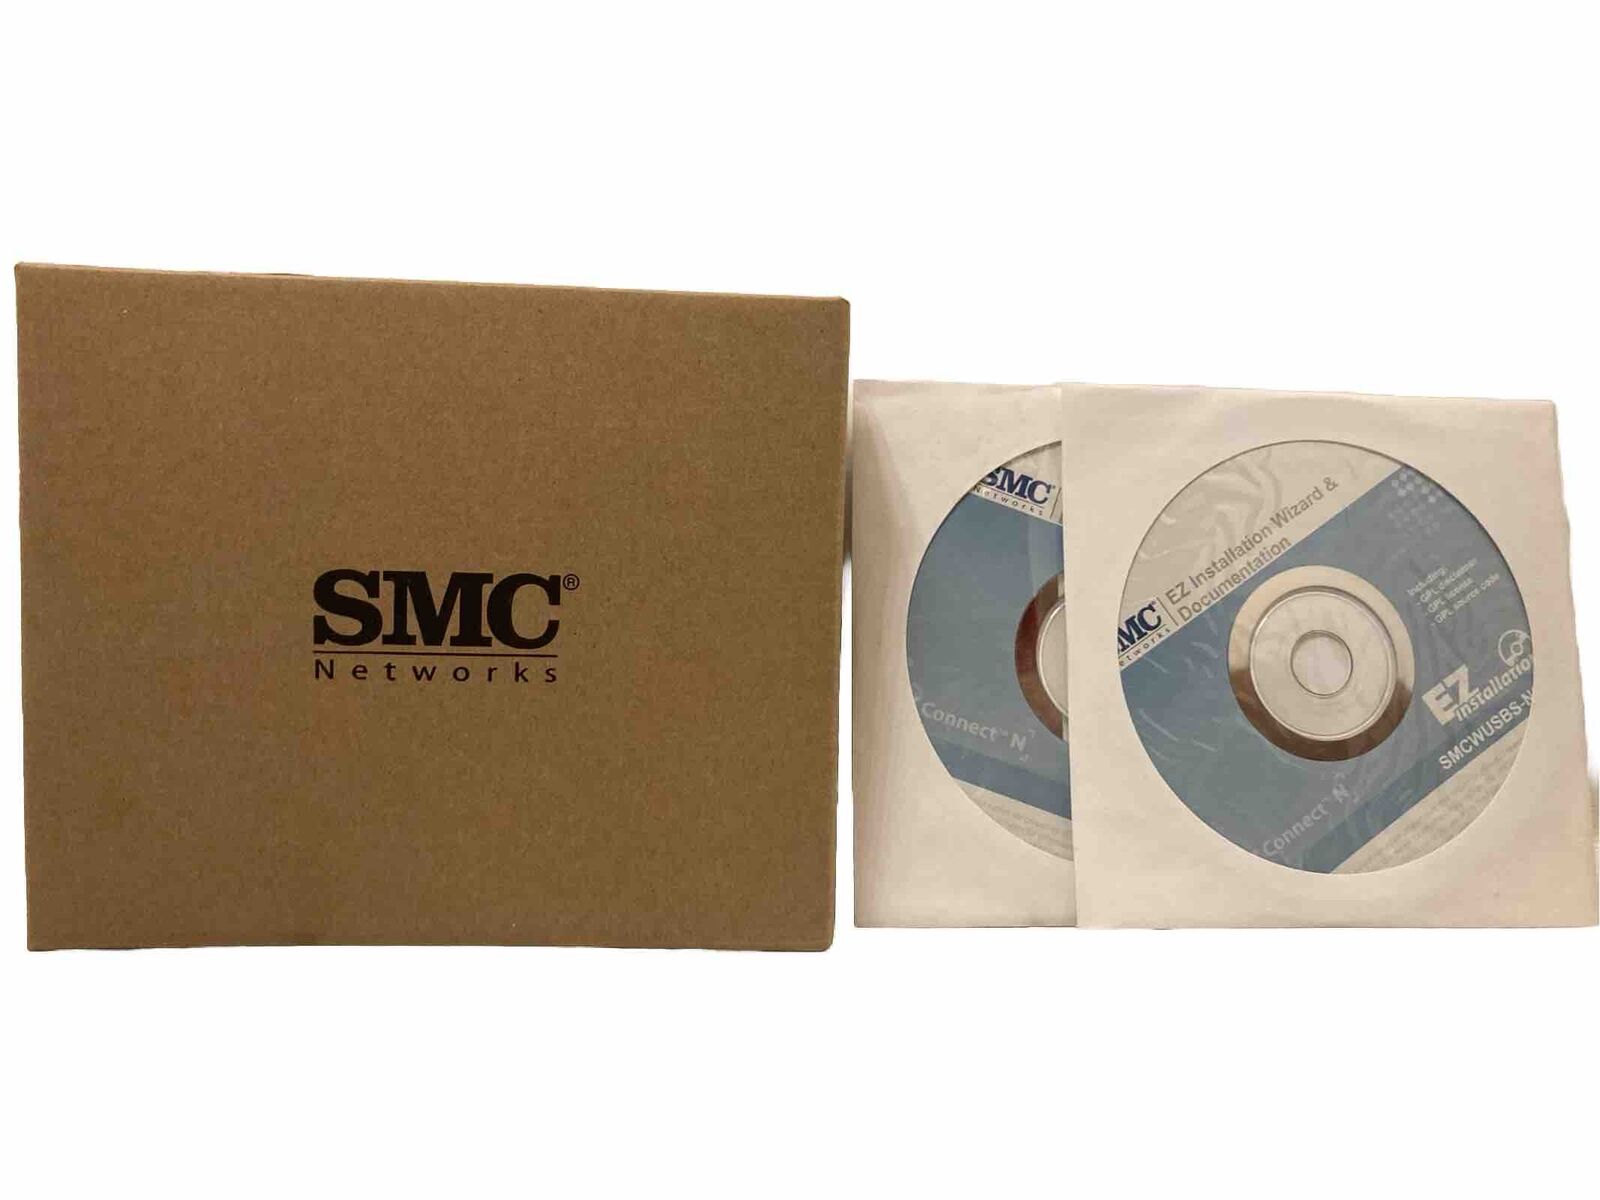 SMC Networks EZ Connect USB 802.11n 300Mbps Fast Eth Adapter + 2 Document CDs